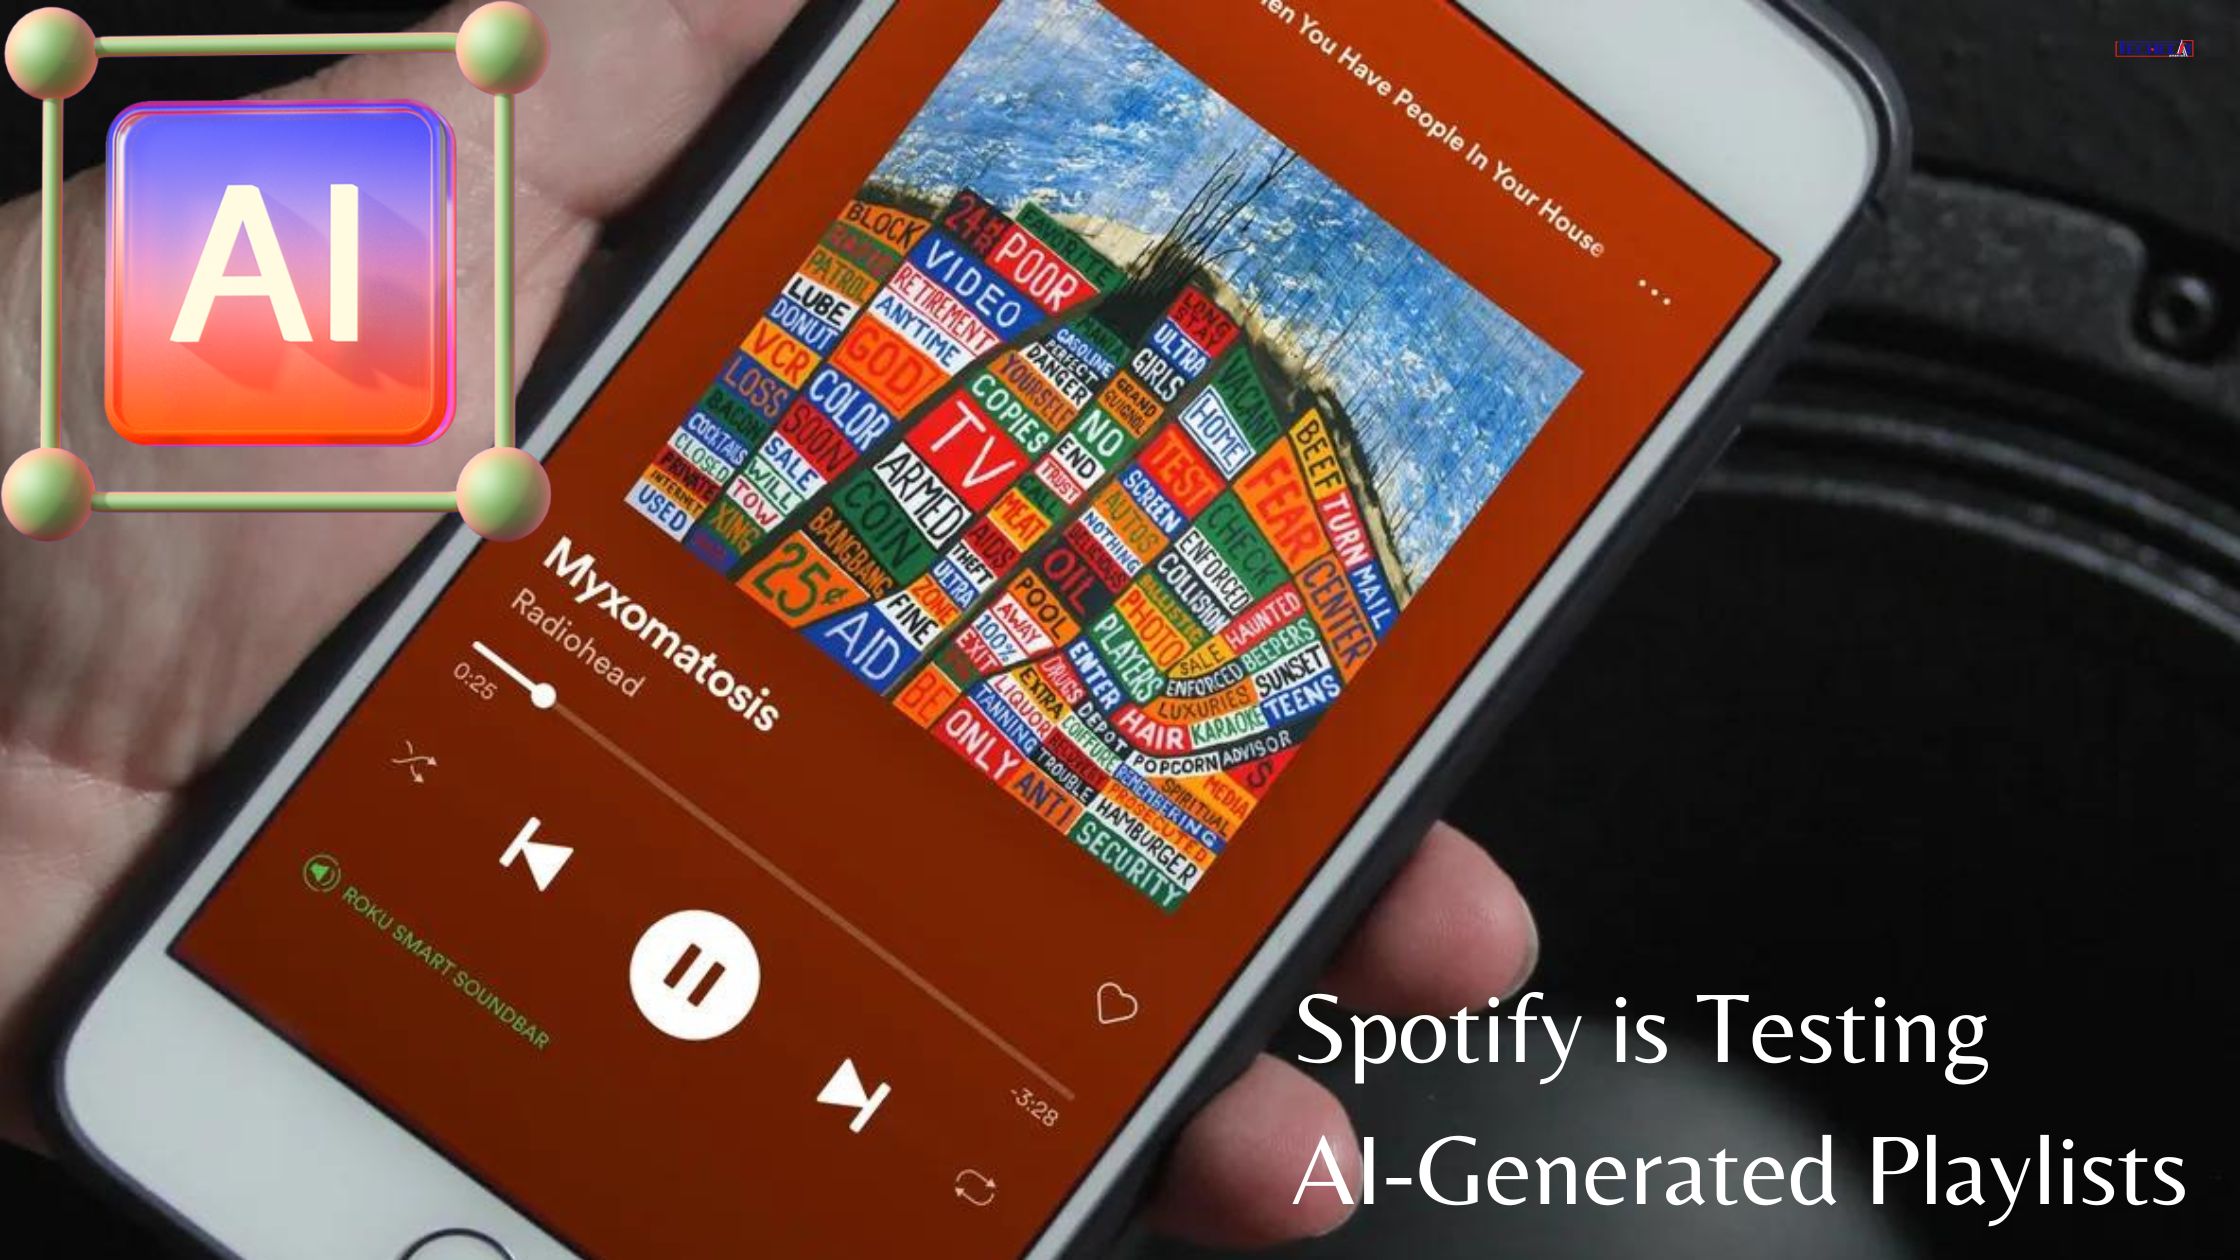 Spotify is Testing AI-Generated Playlists